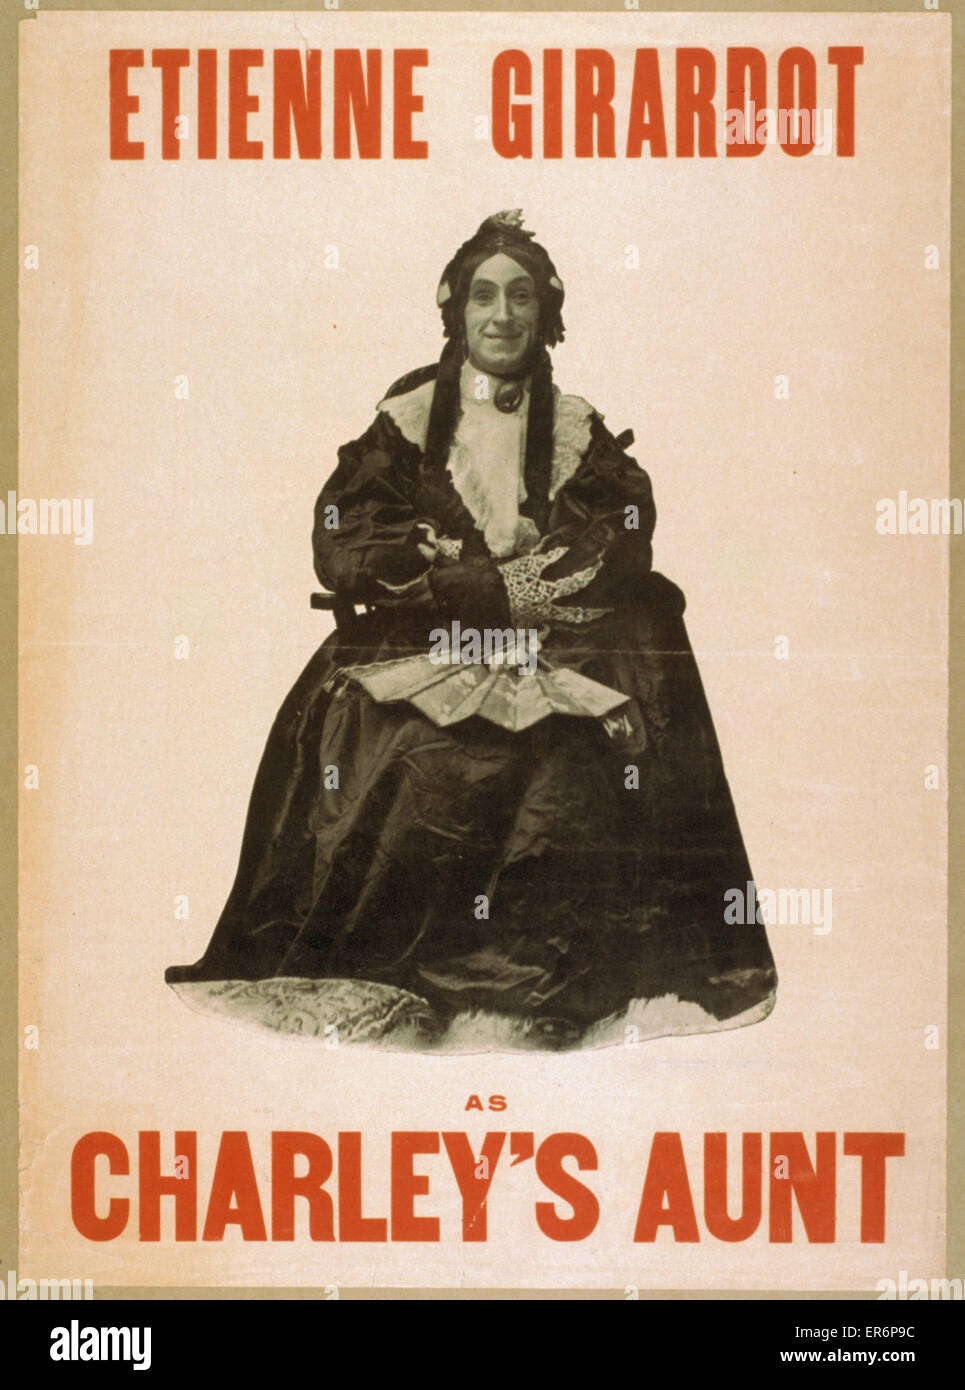 Etienne Girardot as Charley's Aunt Stock Photo